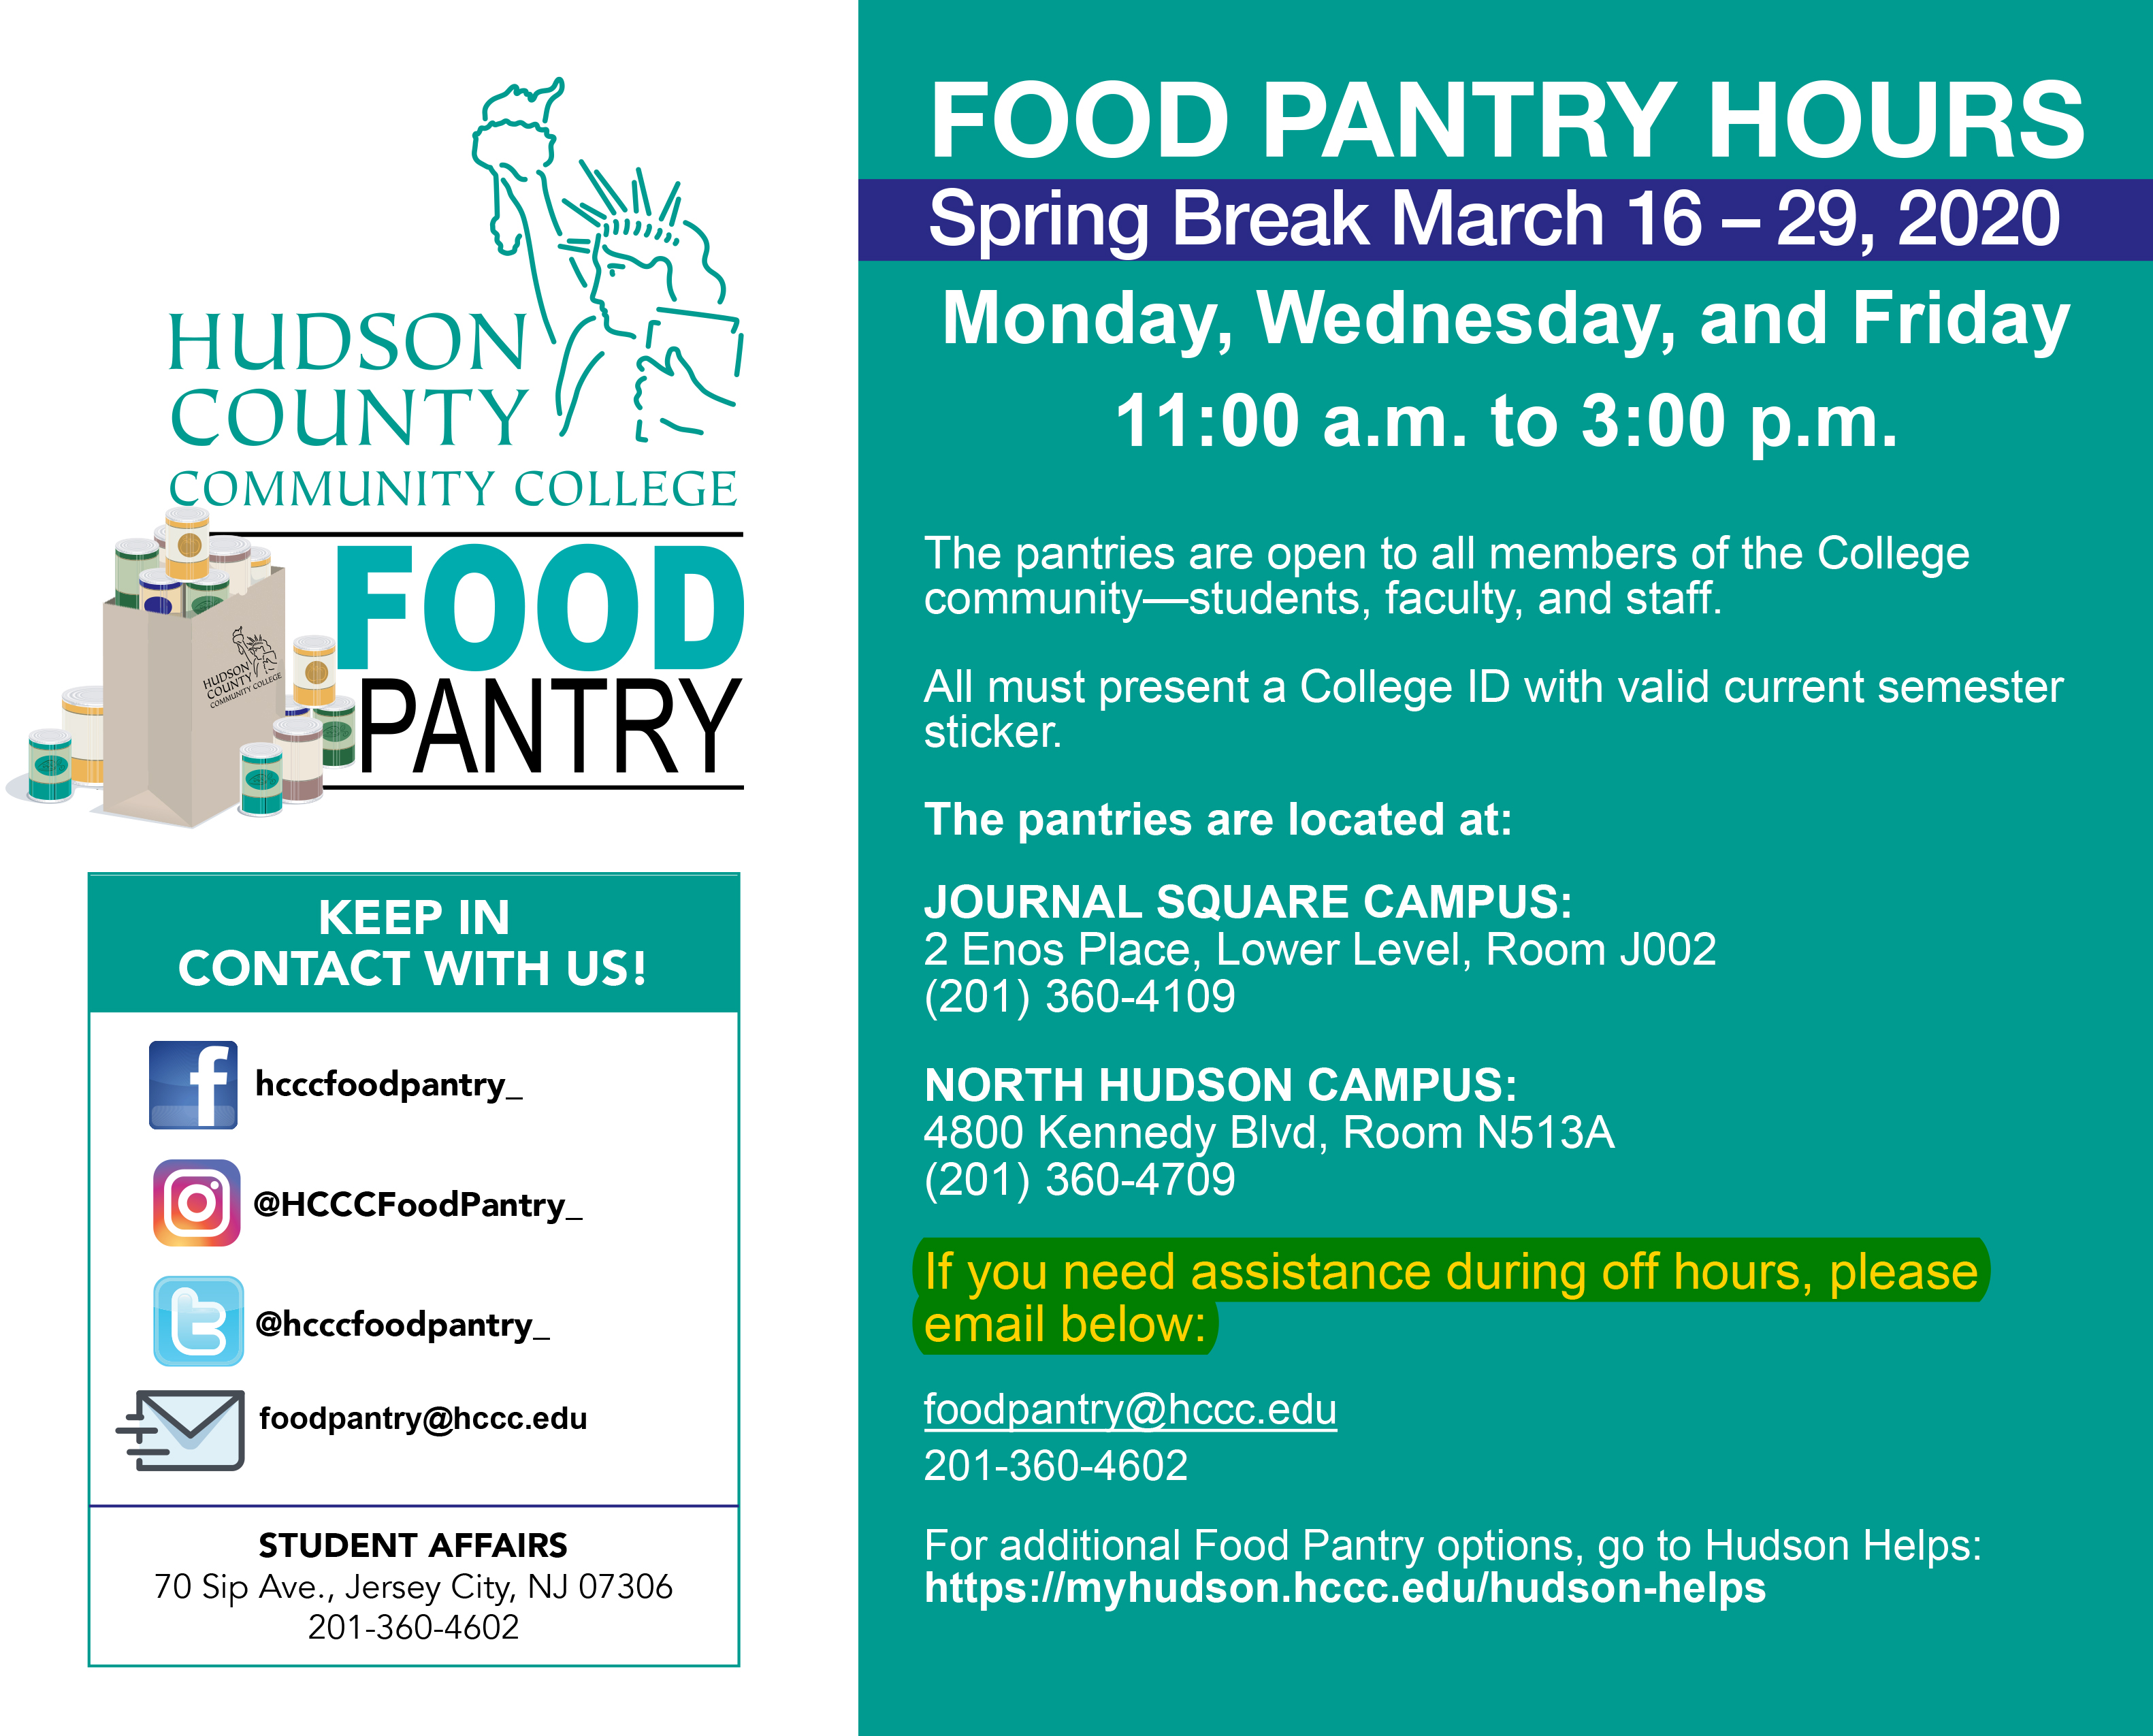 The Food Pantry Hours Flyer.